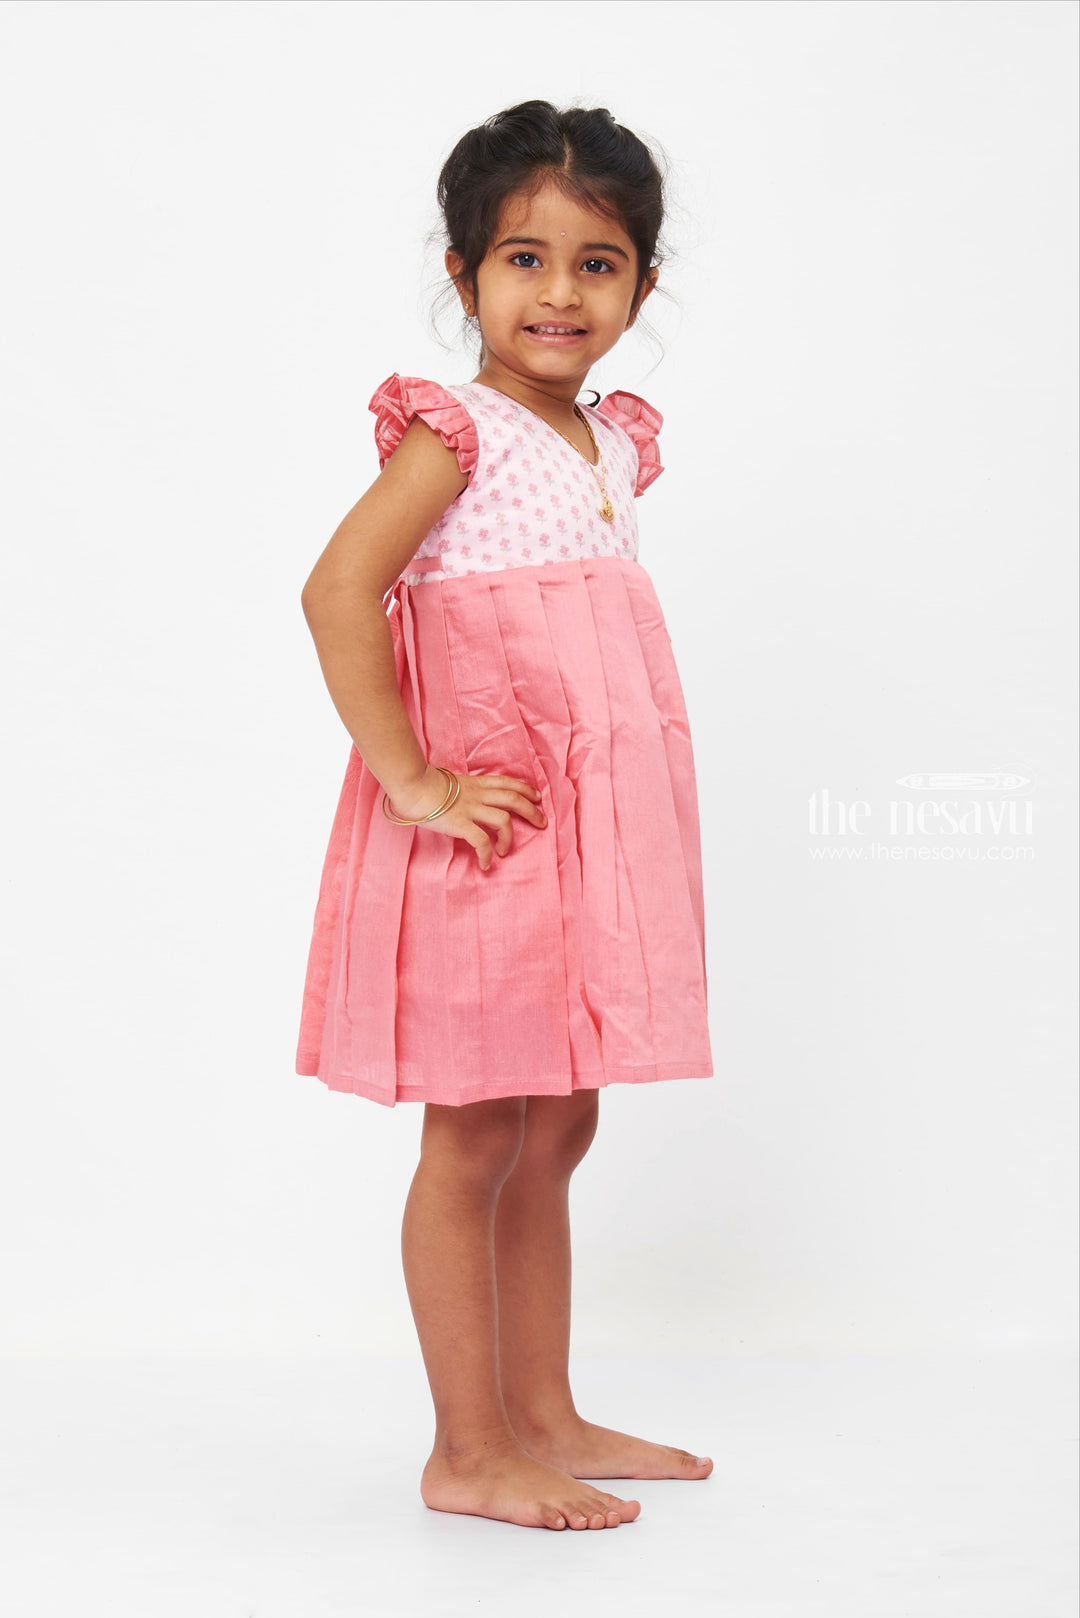 The Nesavu Girls Cotton Frock Coral Pleated Cotton Dress with Floral Printed Yoke for Girls Nesavu Girls Floral Yoke Pleated Dress | Coral Cotton Frock for Casual Wear | The Nesavu